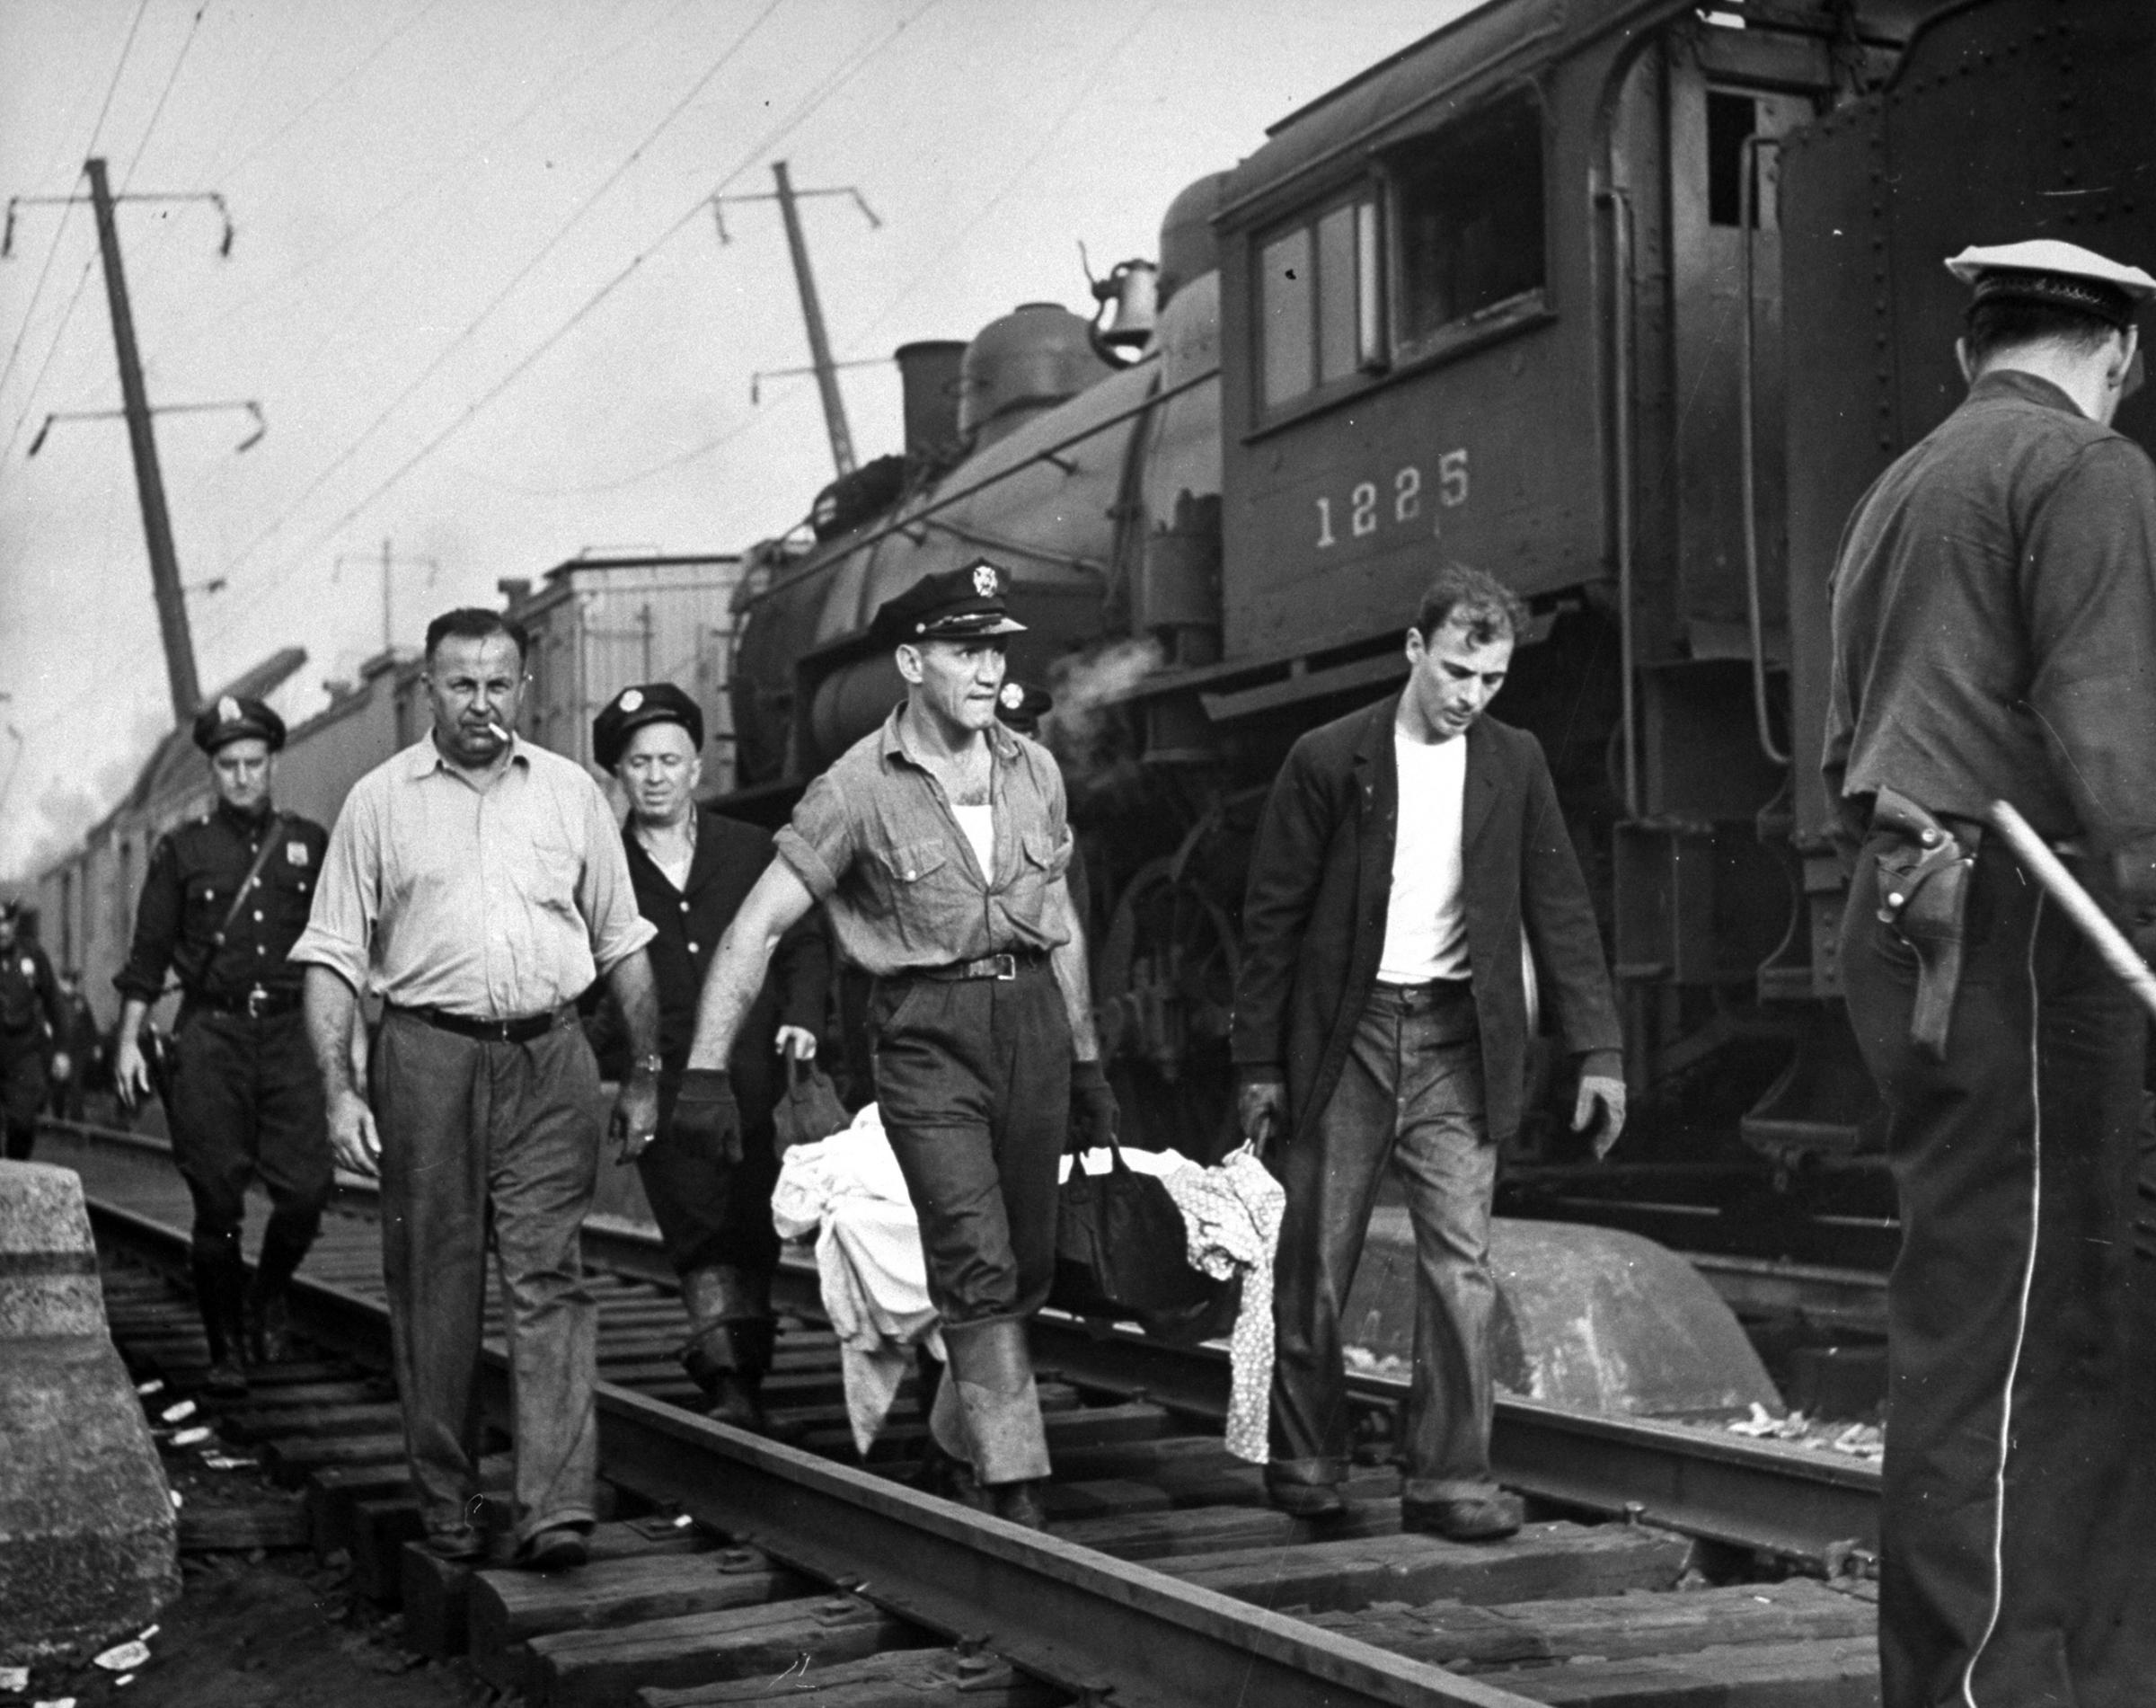 Scene from the 1943 Congressional Limited train wreck in Philadelphia.